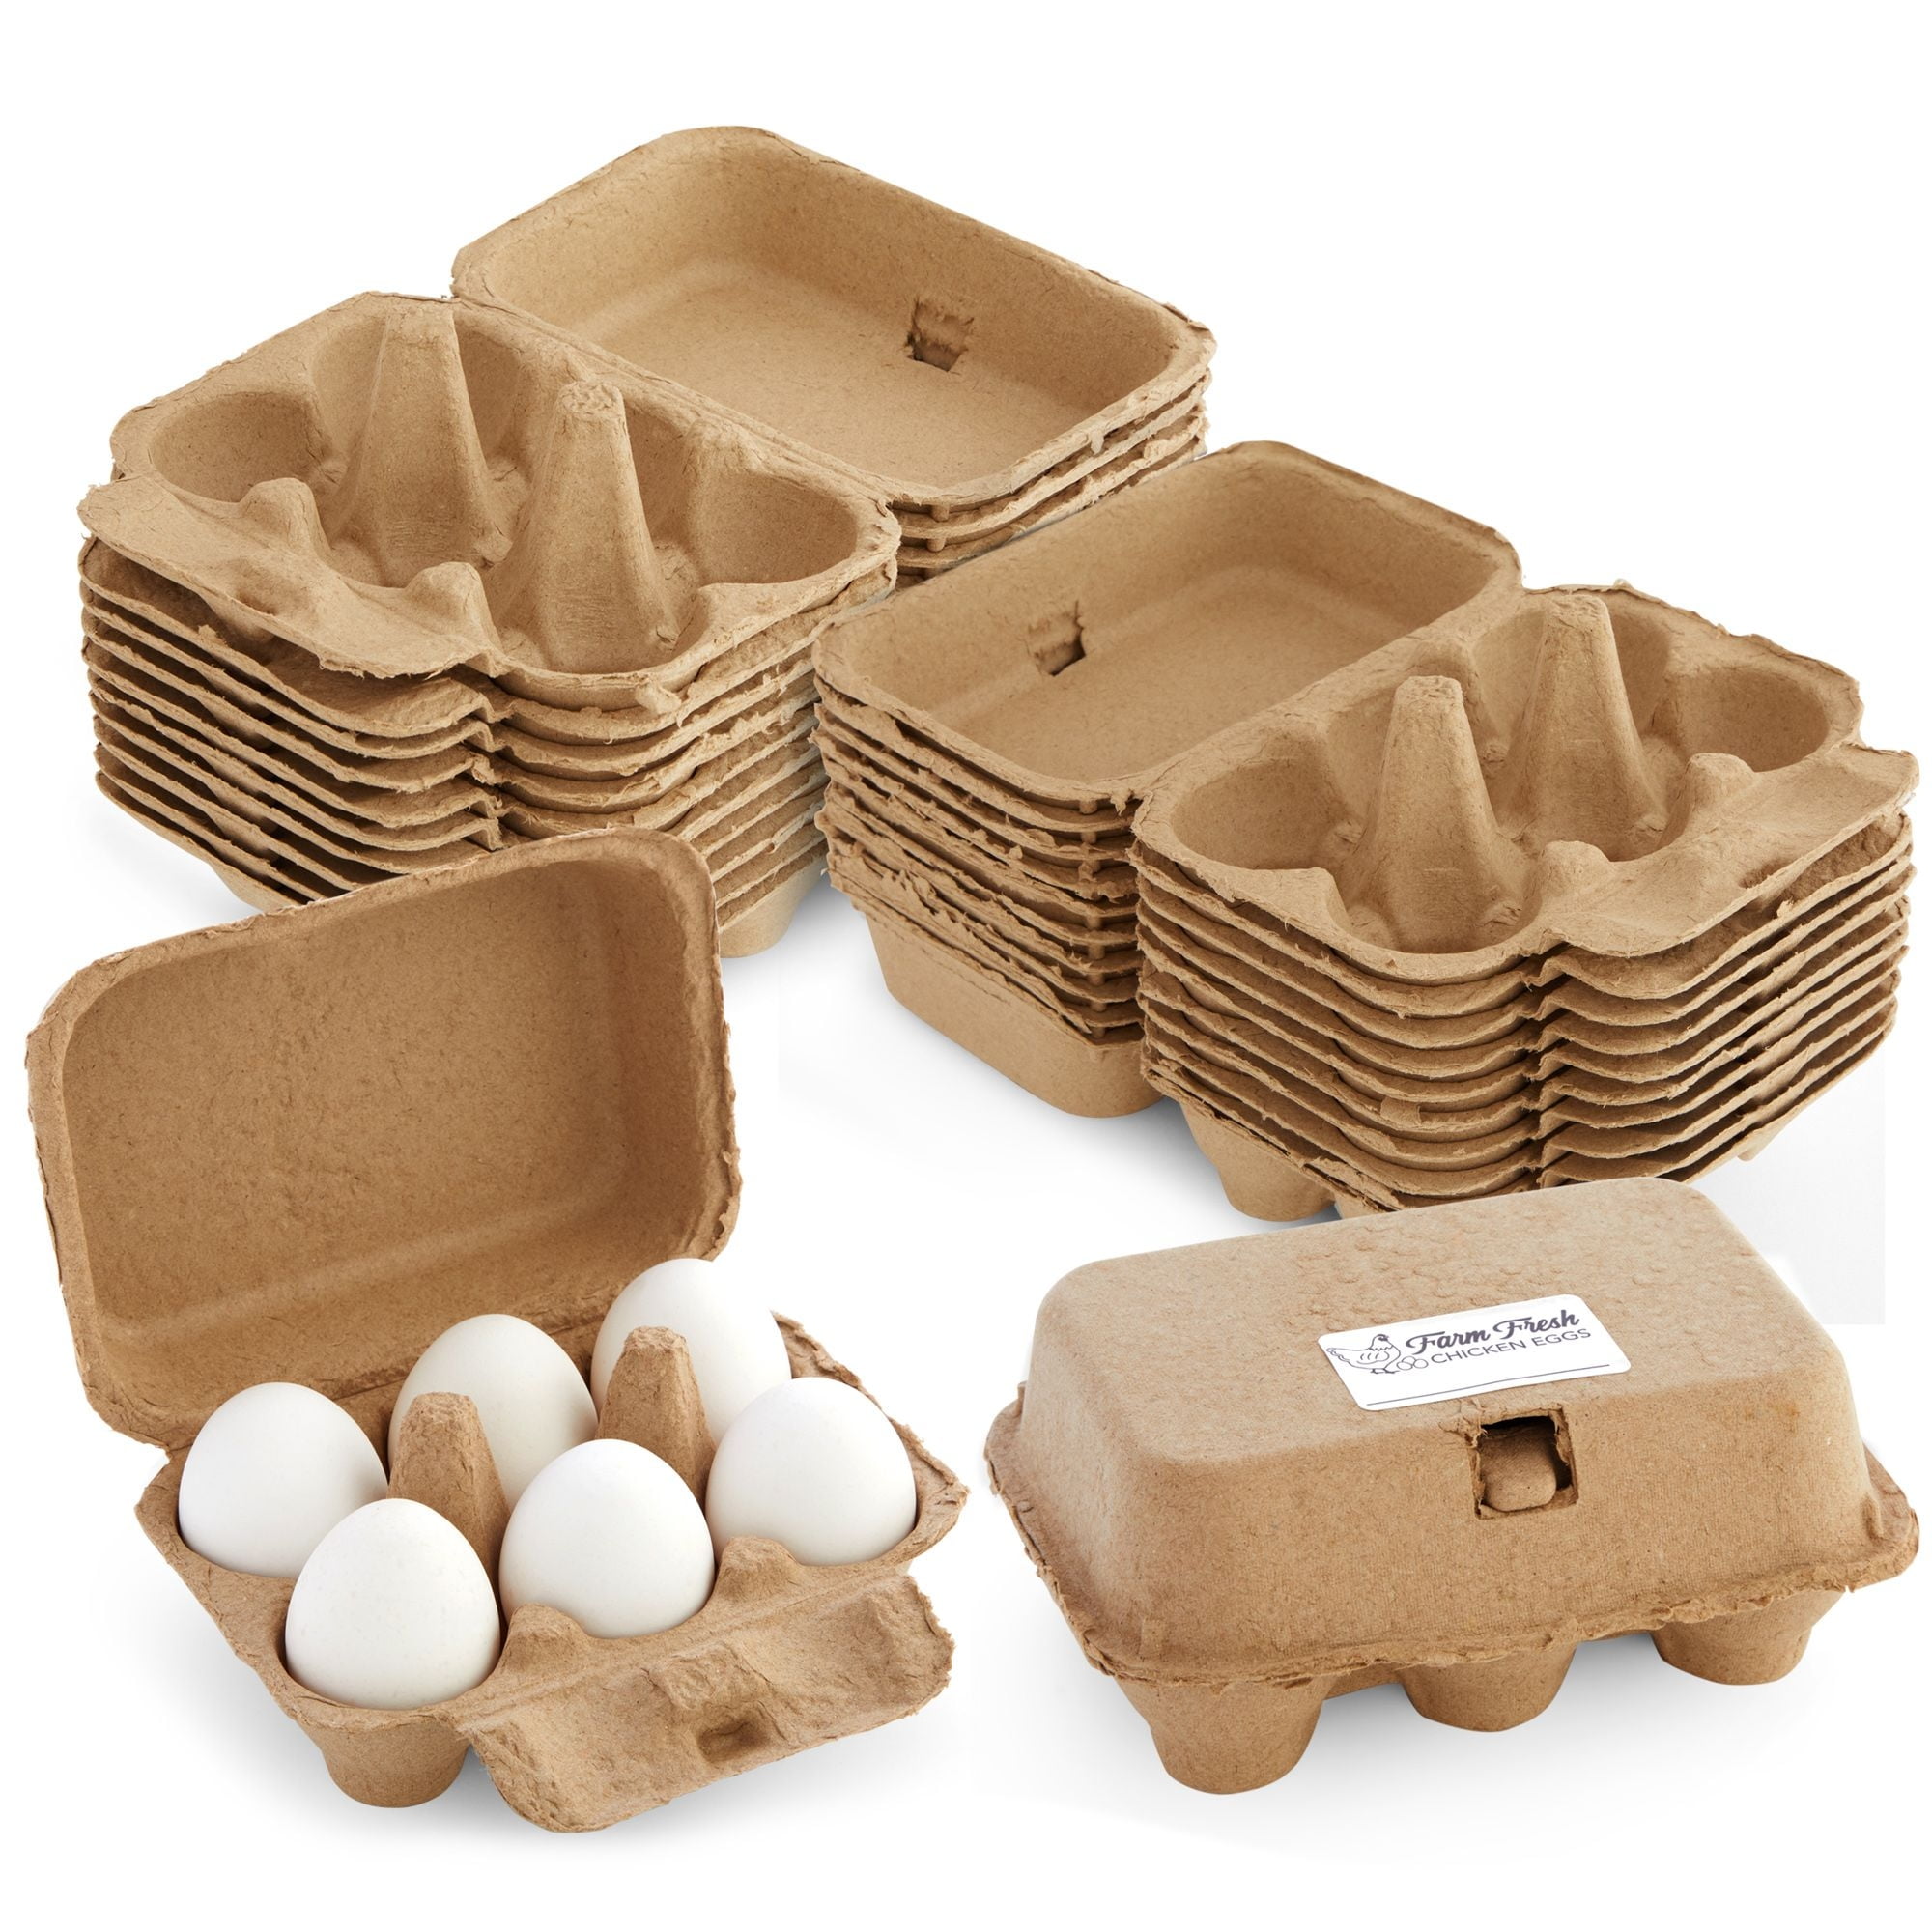 20-Pack Half Dozen Egg Cartons with 25 Farm Fresh Egg Labels, Reusable Egg  Tray Holder, Family Farm Market Travel Egg Storage Containers (6.2x4.5x2.8